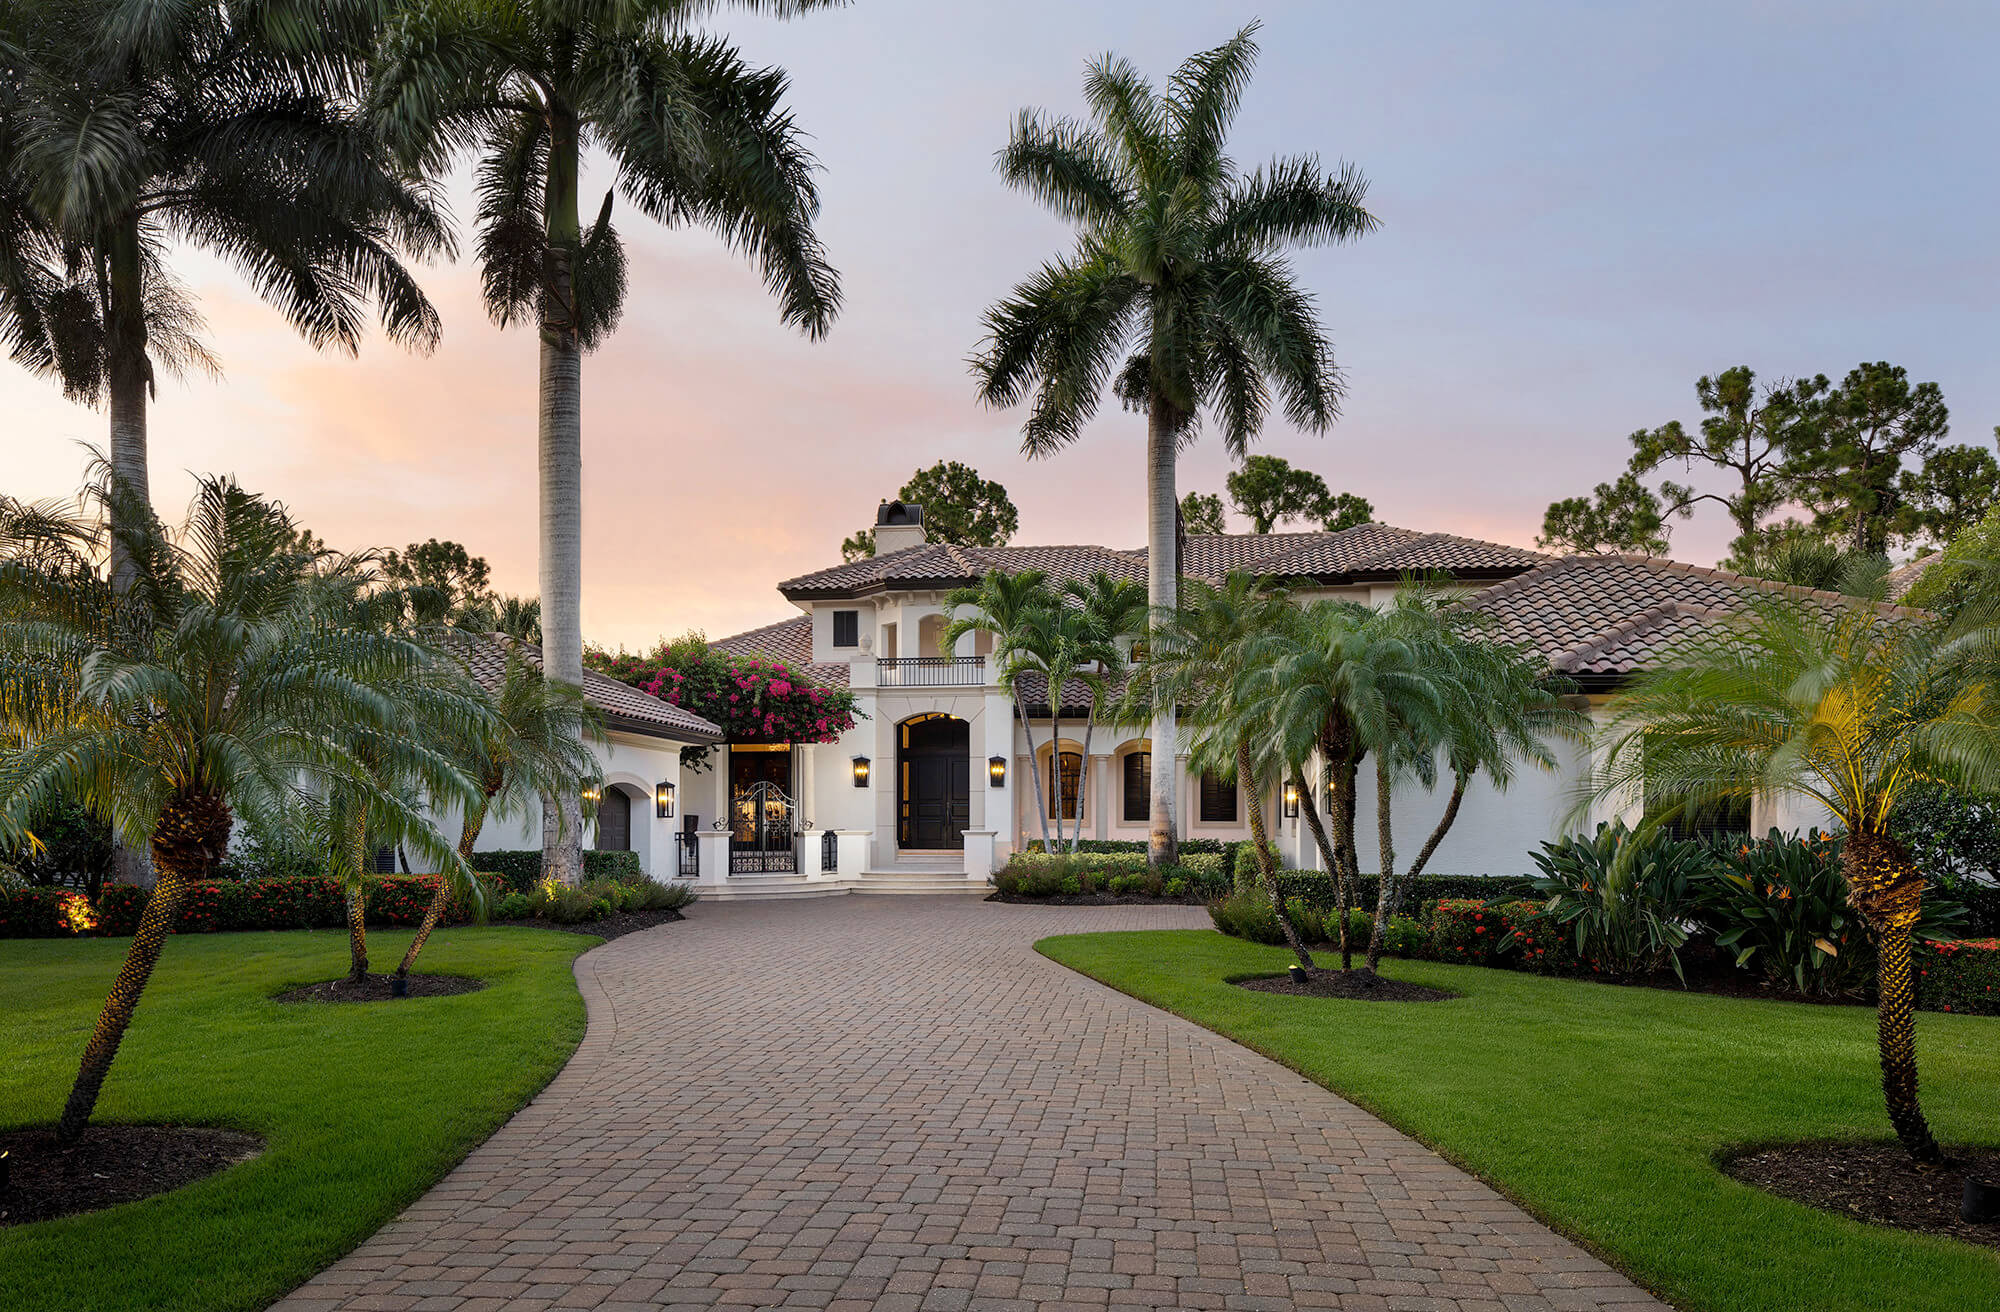 Luxury Home Decor Tips That You Should Know - New Legacy Homes Tampa